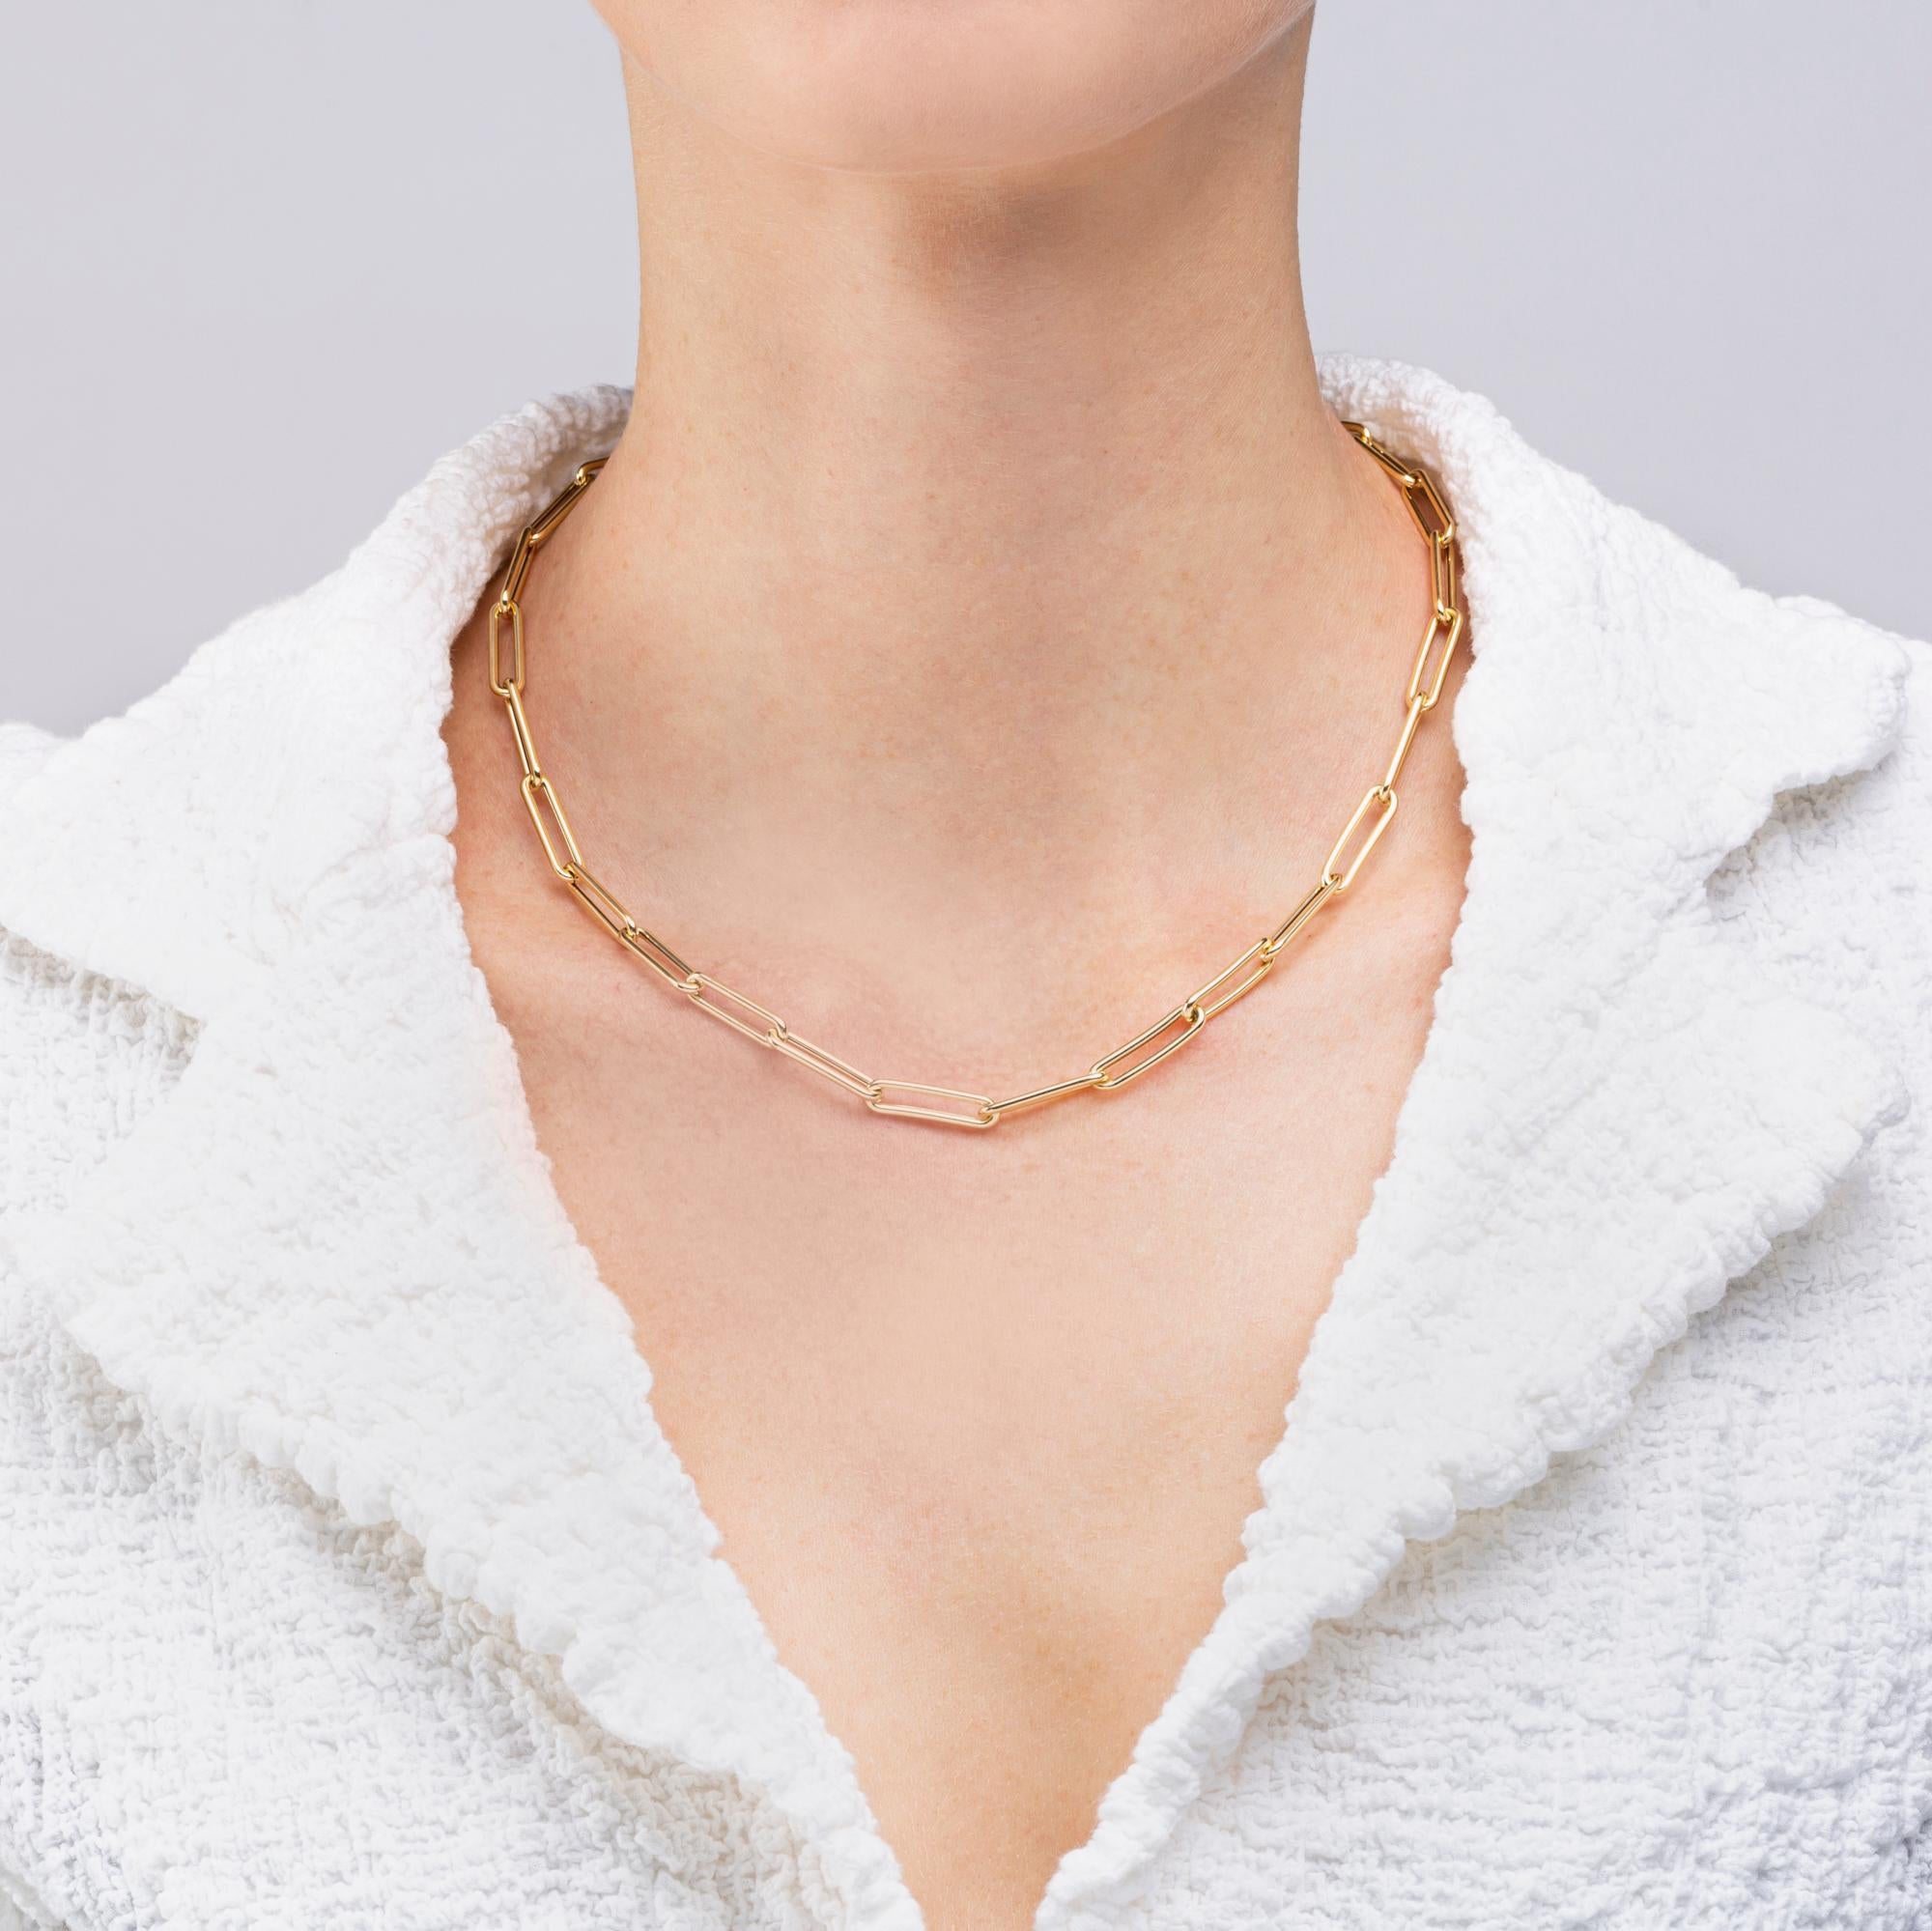 Alex Jona Design Collection, Hand crafted in Italy, 18 karat yellow gold, 17.7inch-45cm long, link chain necklace. 

Alex Jona jewels stand out, not only for their special design and for the excellent quality of the gemstones, but also for the